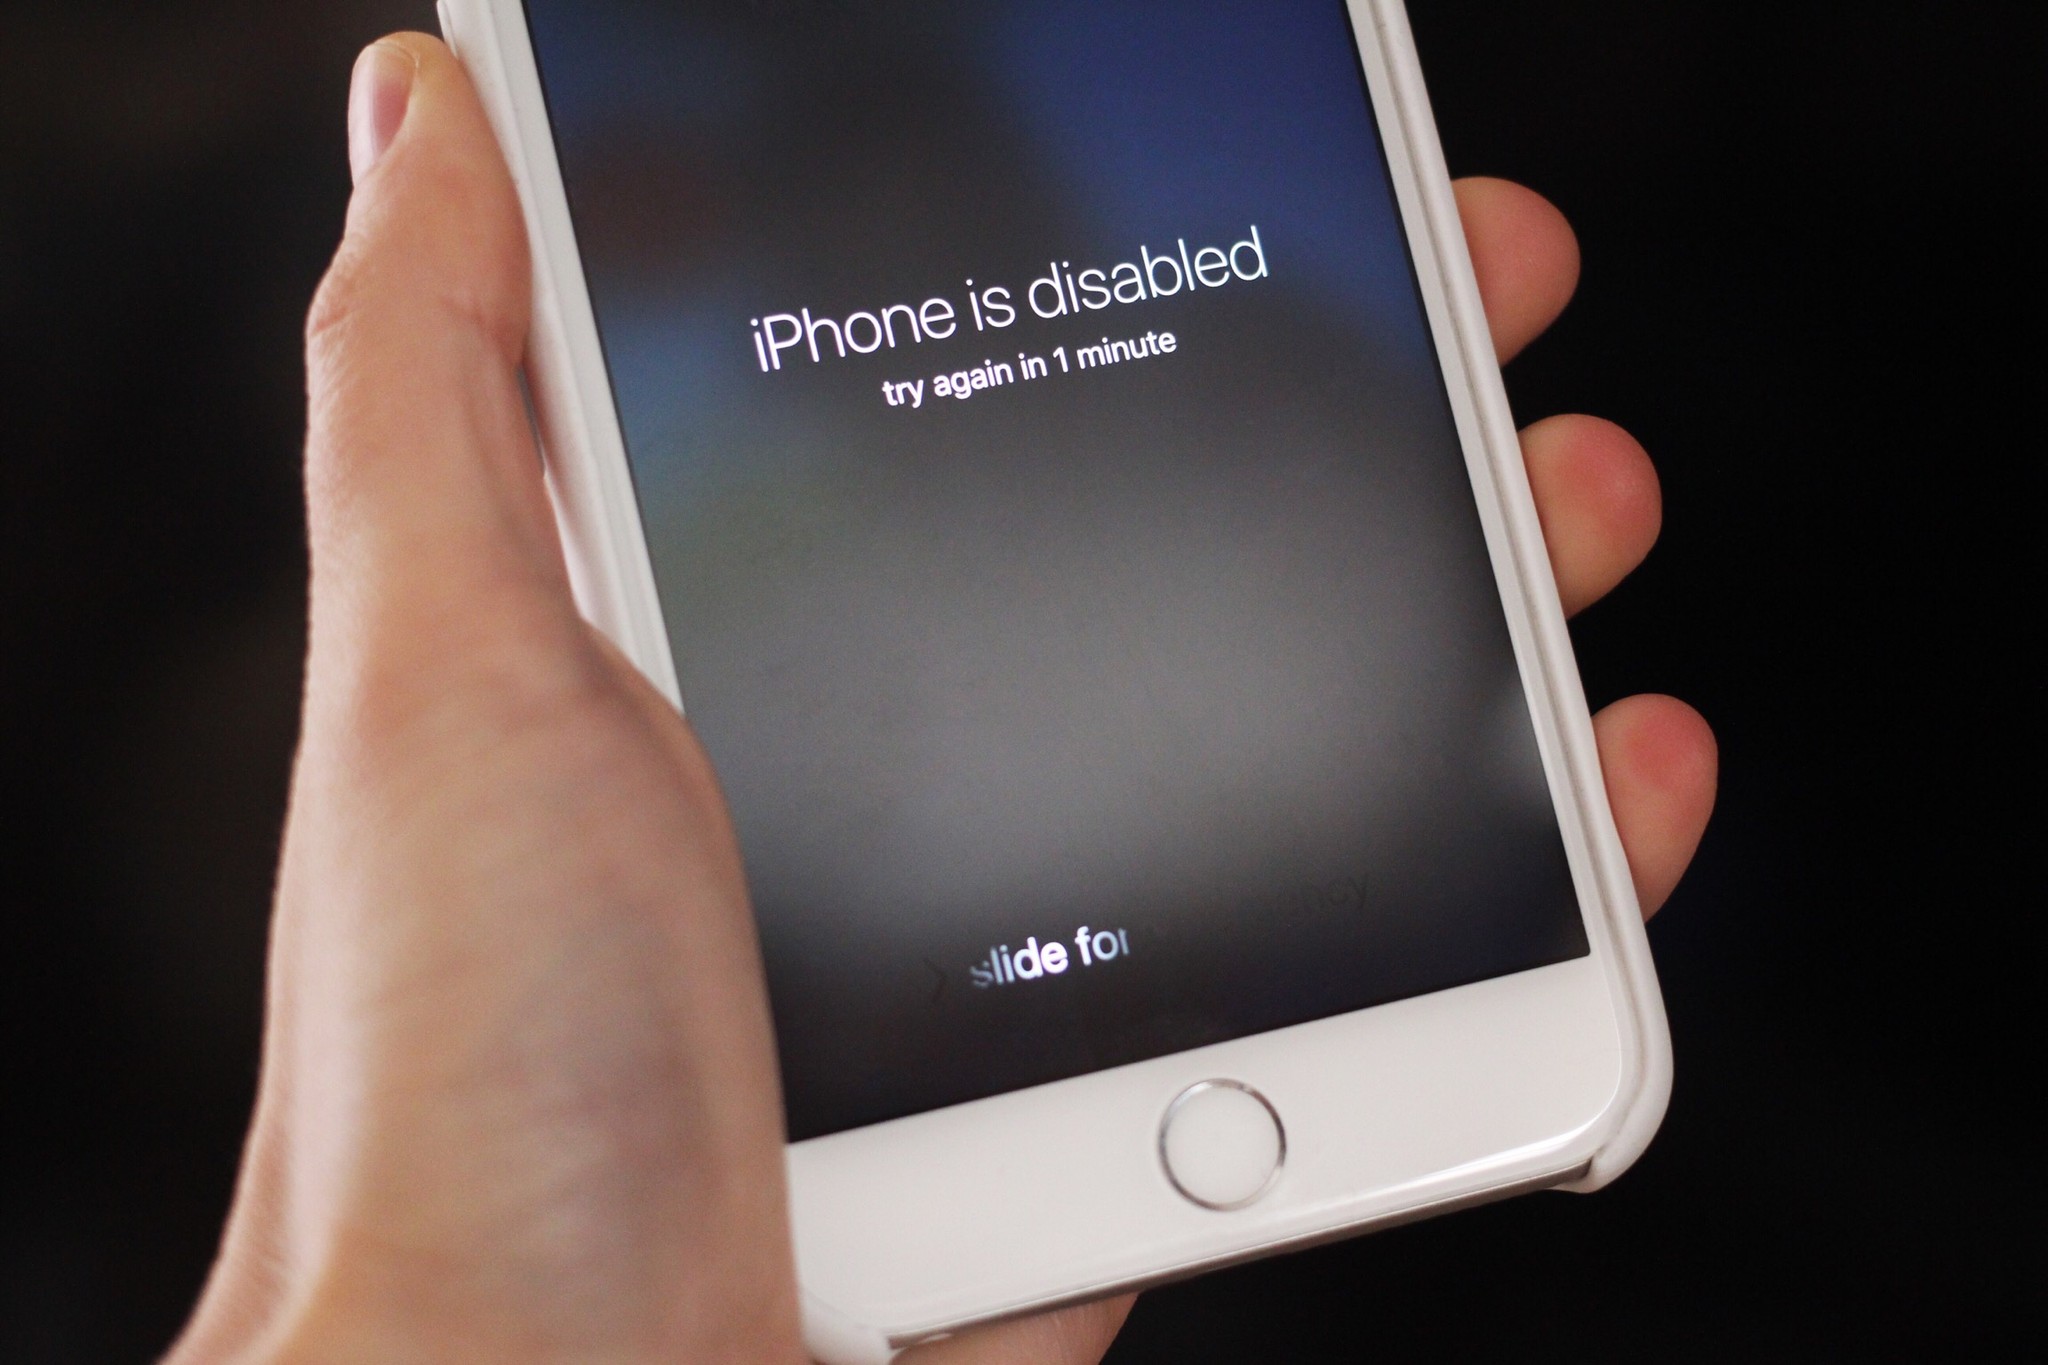  A person holding a phone that is locked and disabled with a message saying 'iPhone is disabled, try again in 1 minute'.